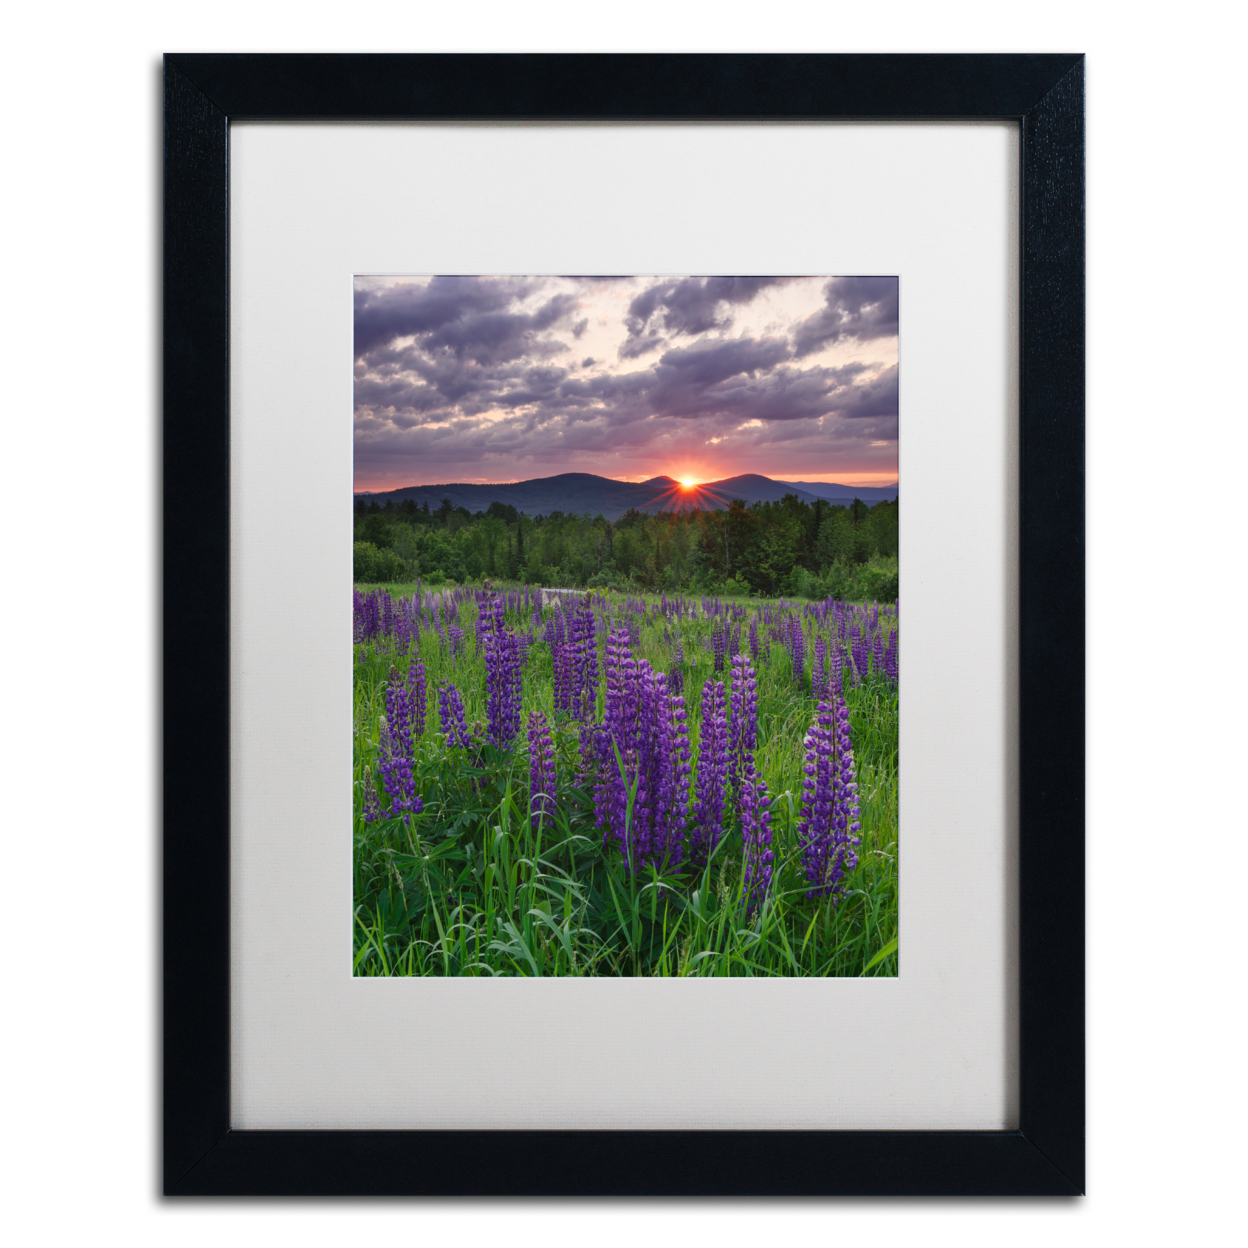 Michael Blanchette Photography 'Moody Sunrise' Black Wooden Framed Art 18 X 22 Inches